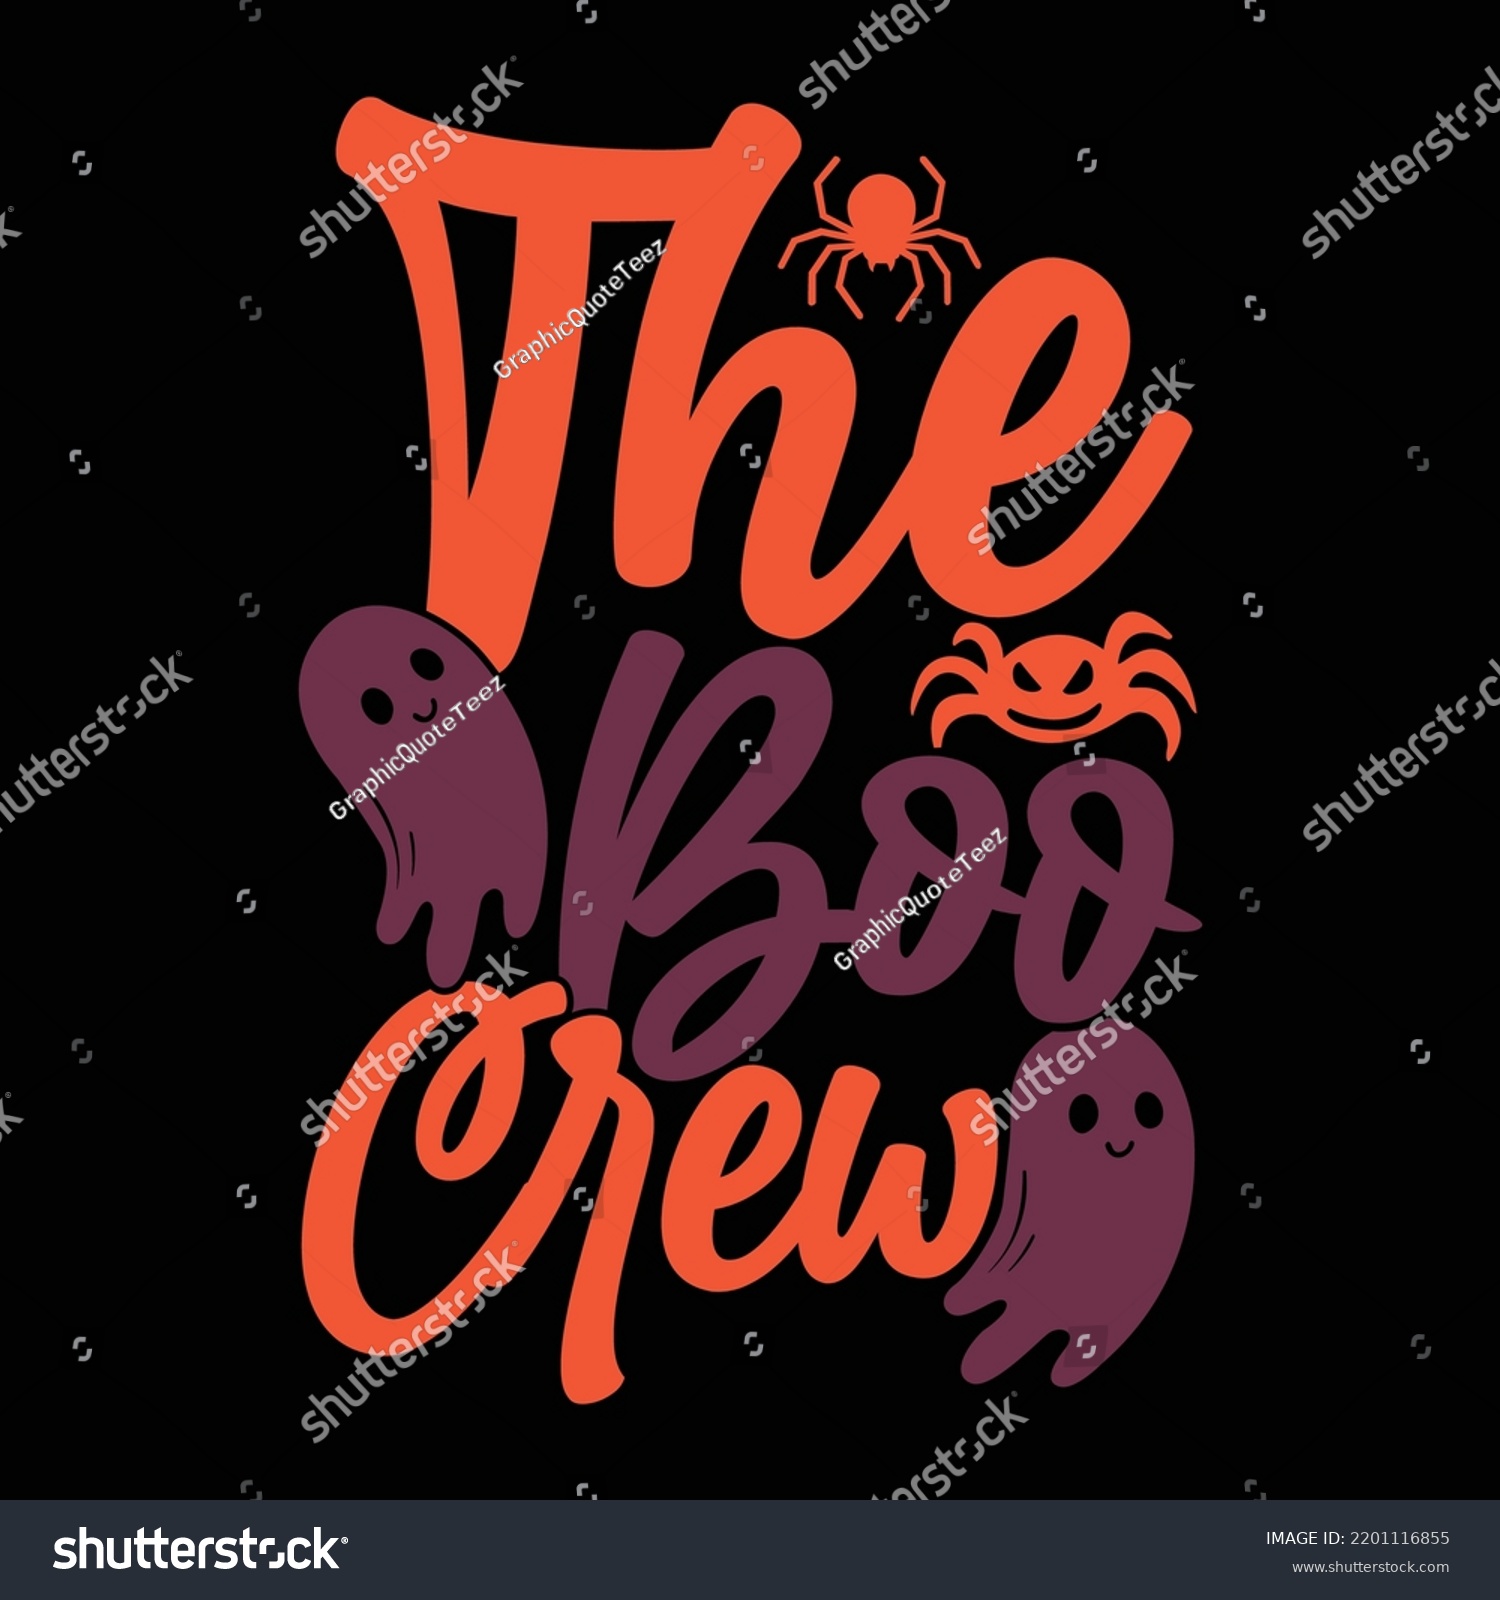 SVG of The Boo Crew Typography Lettering Design, Halloween T Shirt Design, Halloween Greeting With Pumpkin Quote, Holiday Event Boo Crew, Halloween Silhouette Greeting Phrase Vector Illustration Art svg